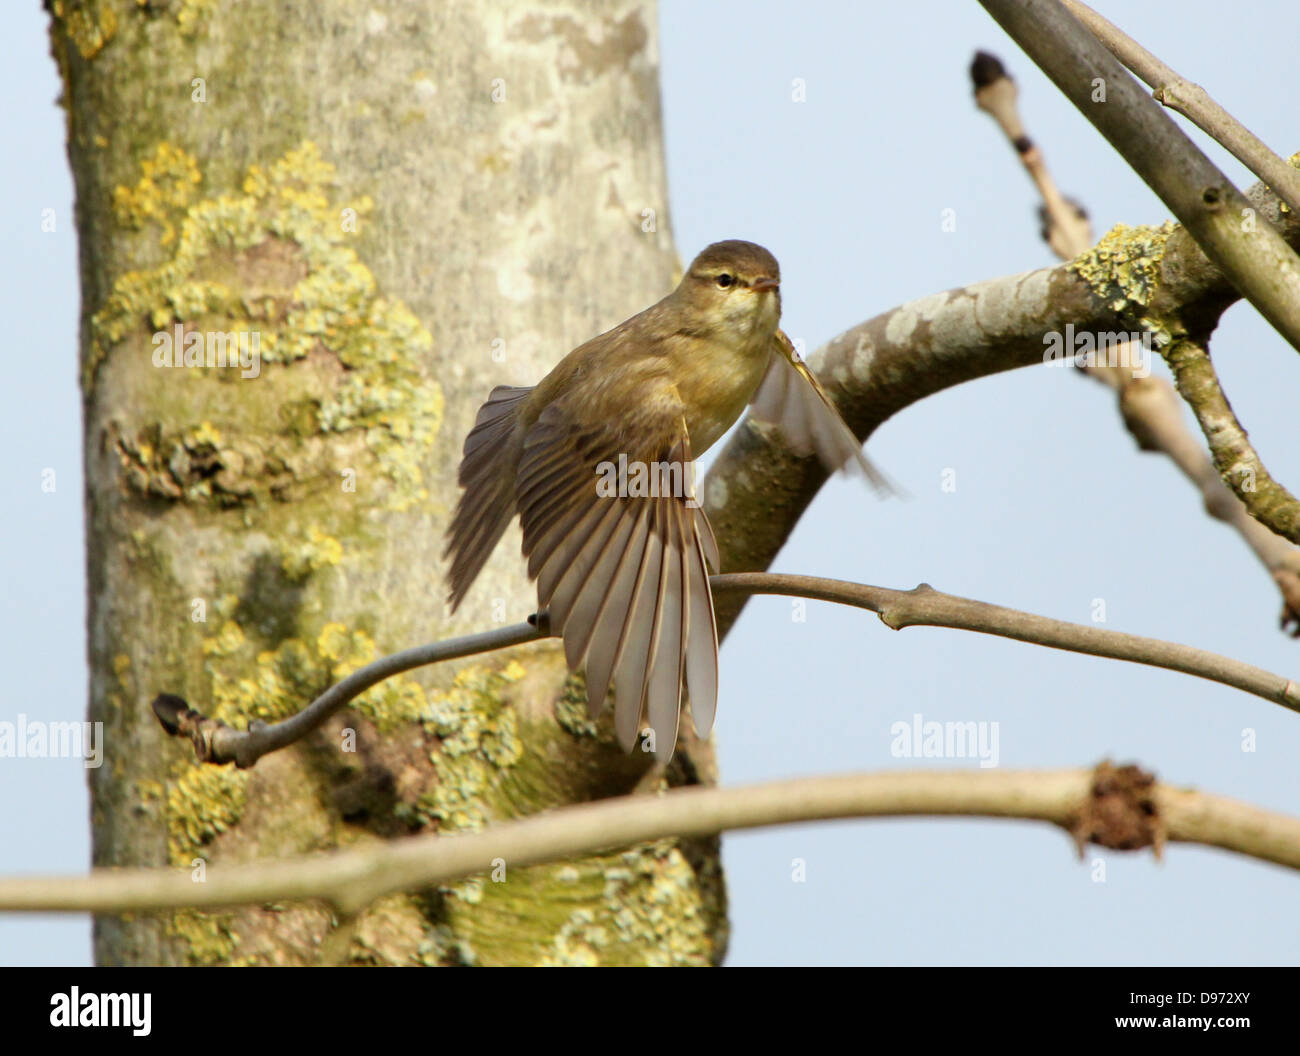 Detailed close-up of a confident Willow Warbler (Phylloscopus trochilus) taking off into flight Stock Photo